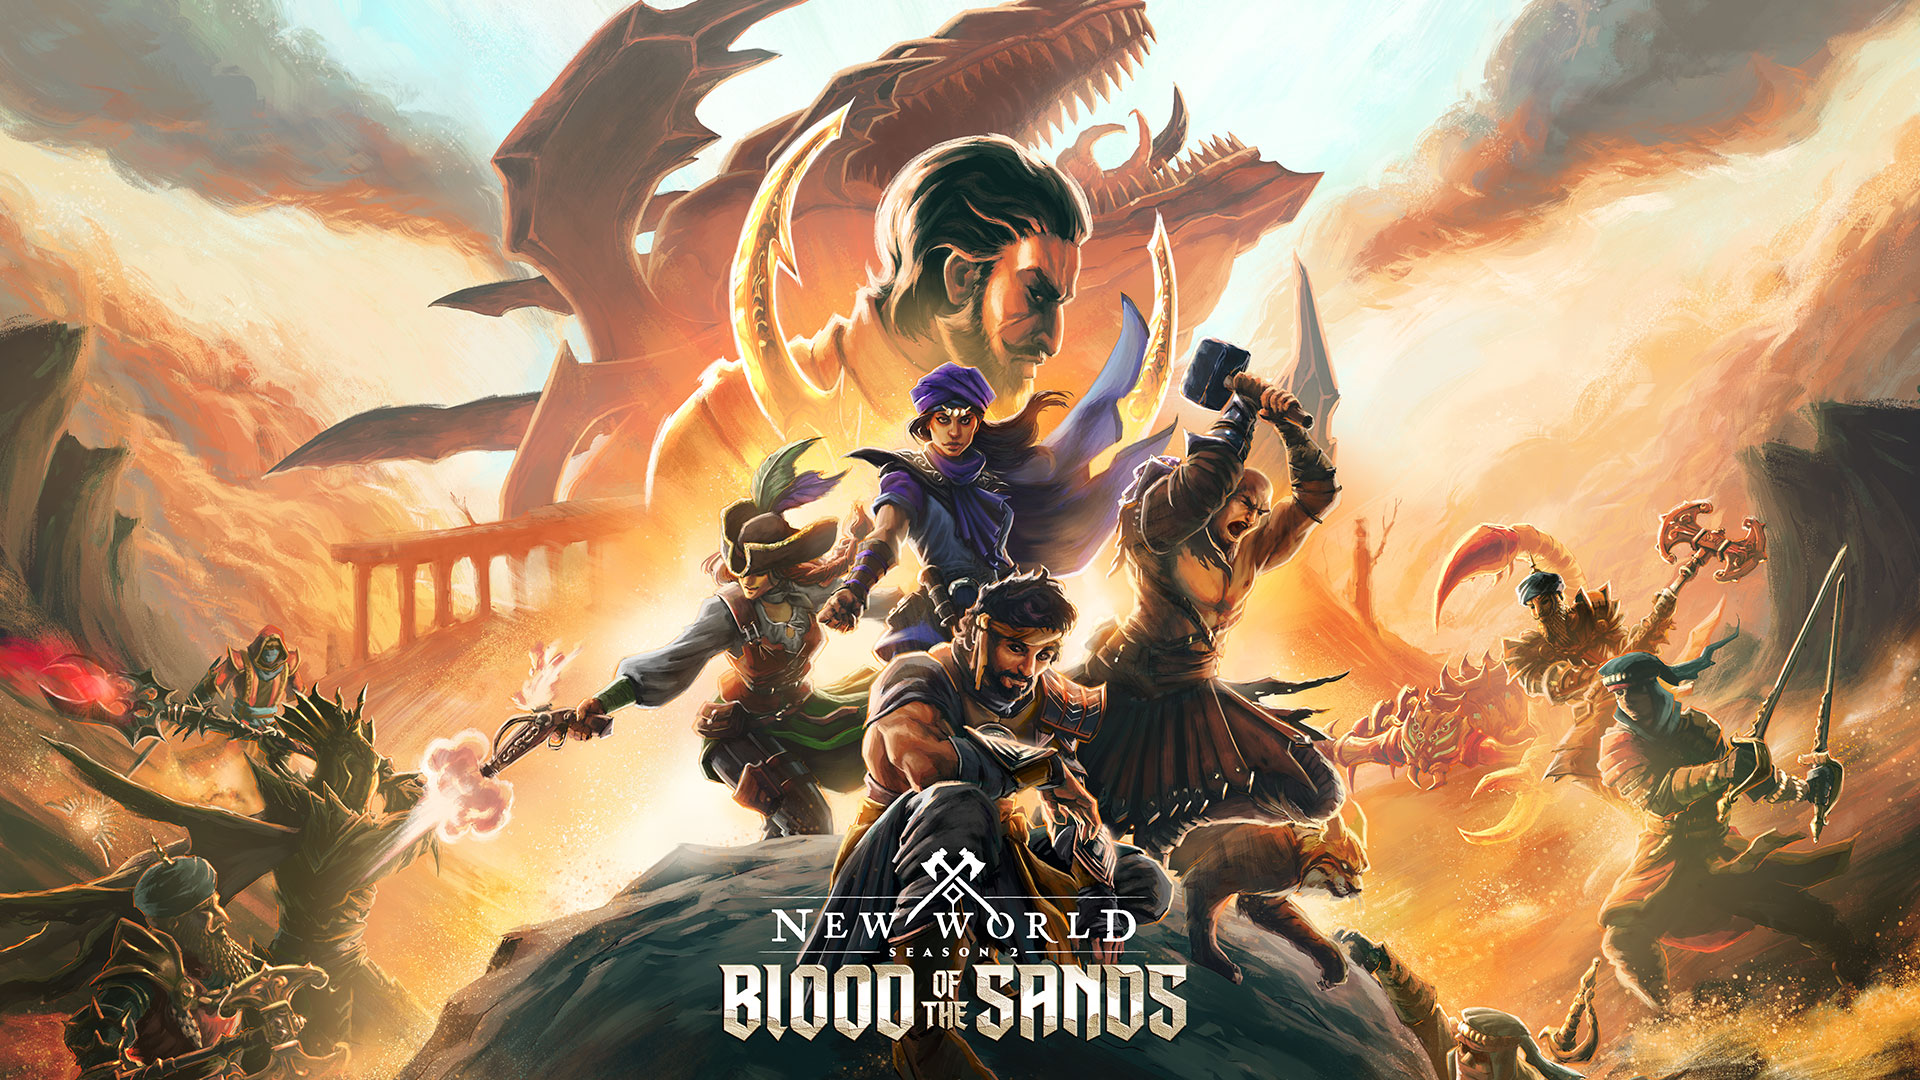 Back 4 Blood's second major expansion out later this month